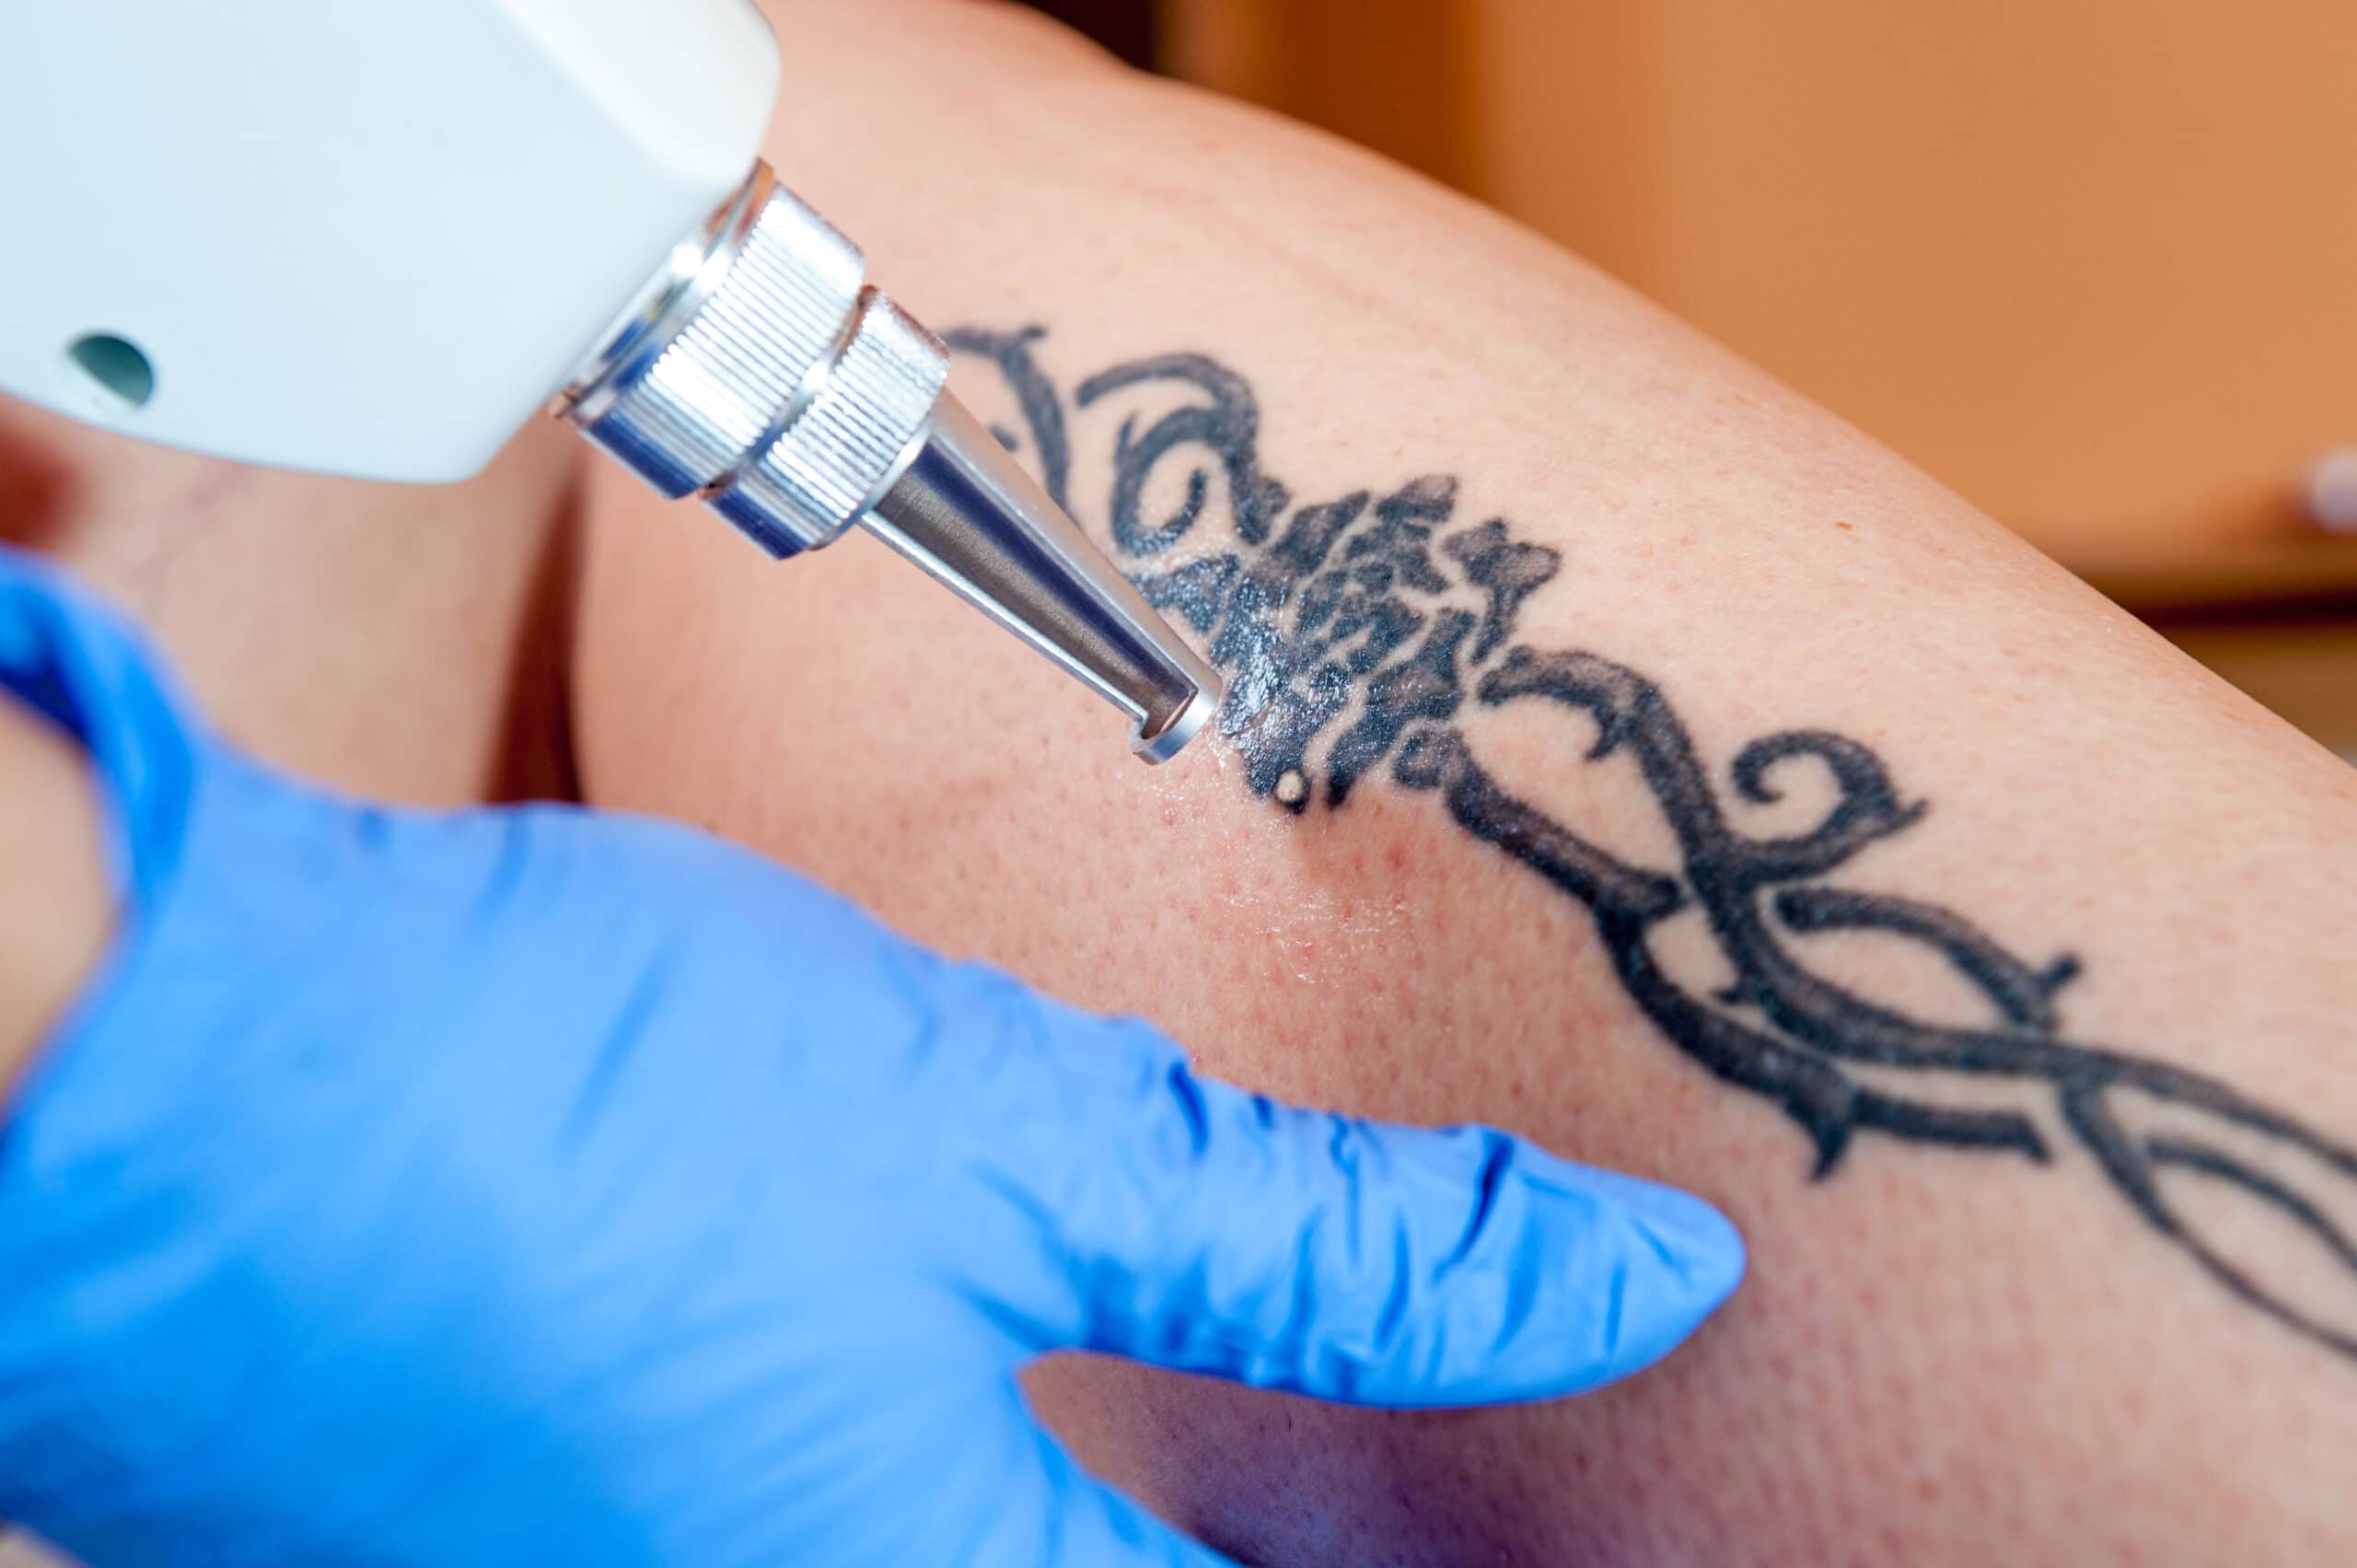 Are you unhappy with a tattoo and want it removed Read this article  BeverlyHills USA California beauty ta  Tattoo removal Laser tattoo  removal Tattoos